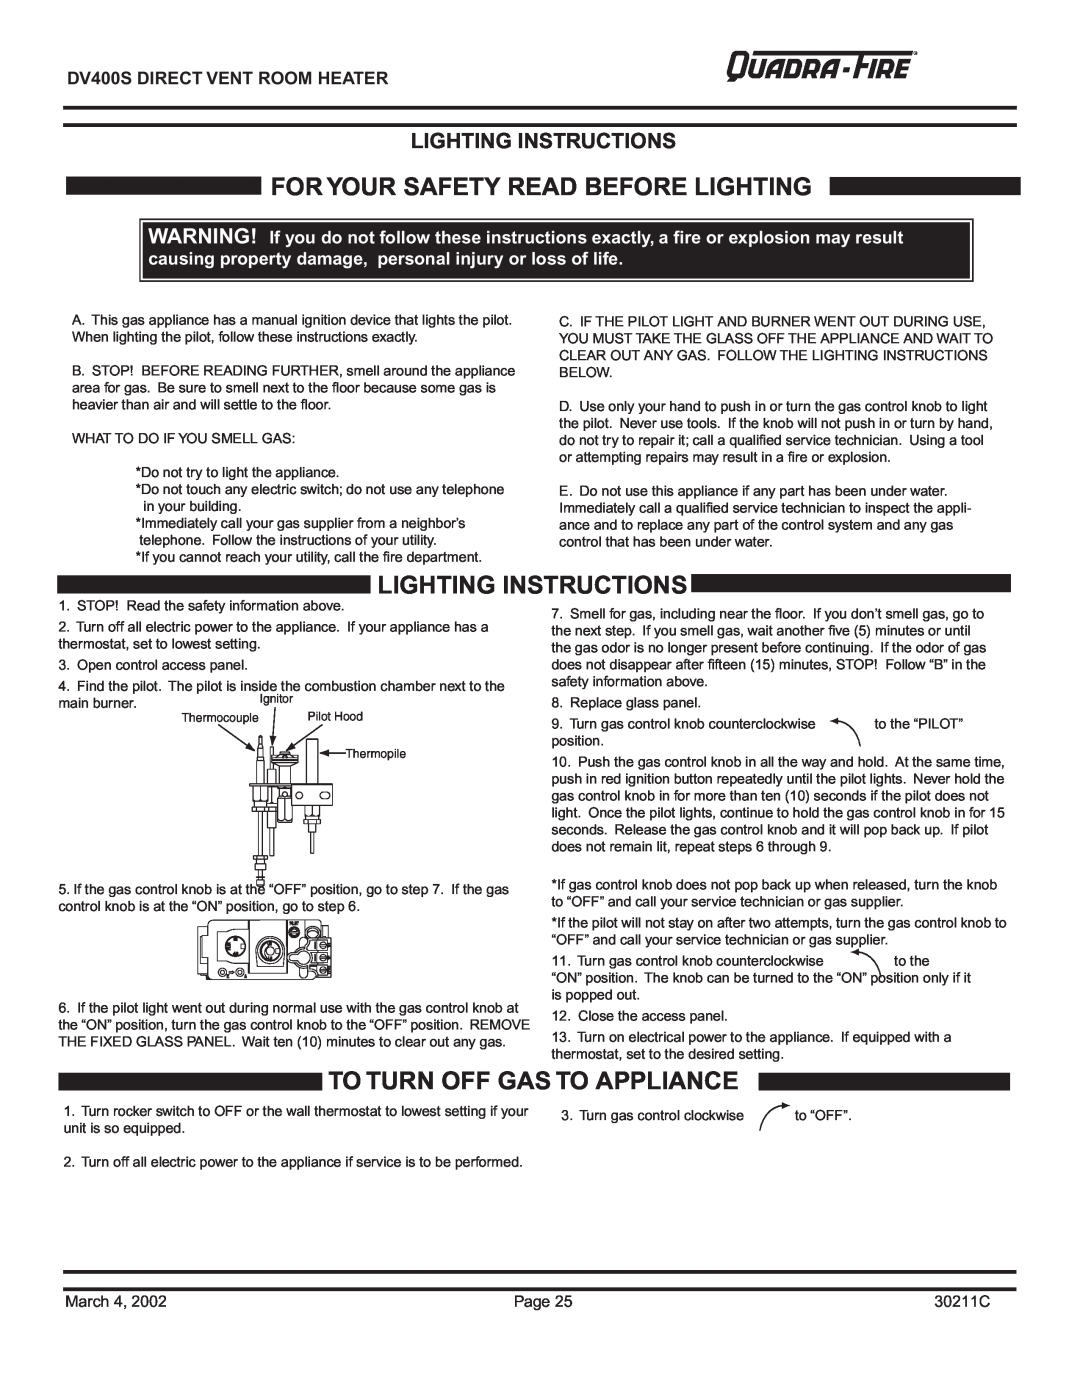 Quadra-Fire DV400S owner manual For Your Safety Read Before Lighting, Lighting Instructions, To Turn Off Gas To Appliance 